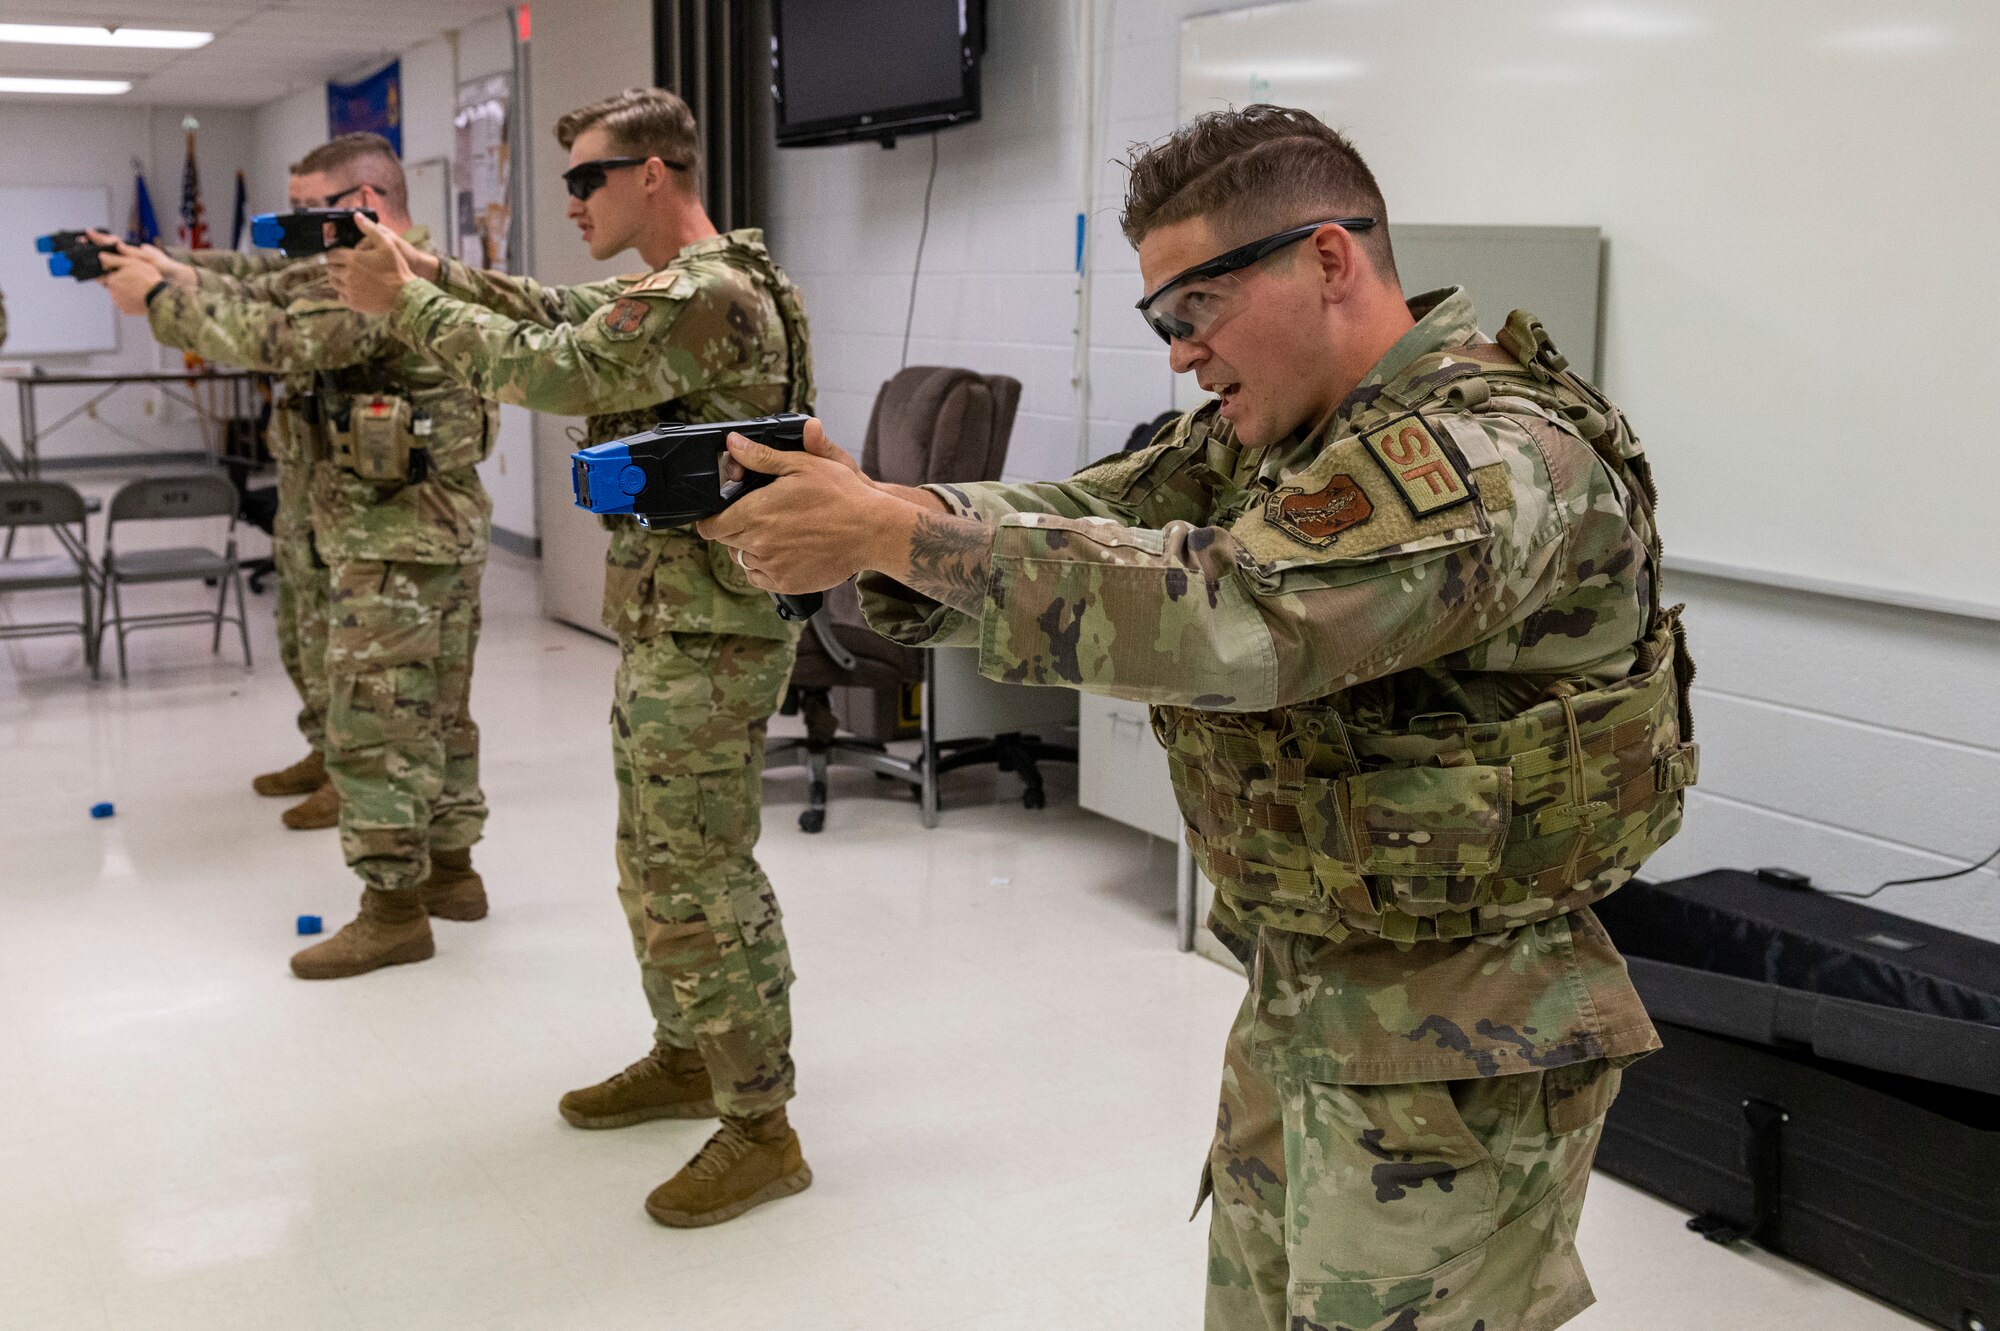 Defenders with the 167th Security Forces Squadron aim their tasers as part of a mock taser deployment training during June’s unit training assembly at the 167th Airlift Wing, Martinsburg, West Virginia, June 10, 2022. Trainings like these allow security forces personnel to become more familiar with their weapon platforms and practice using non-lethal force